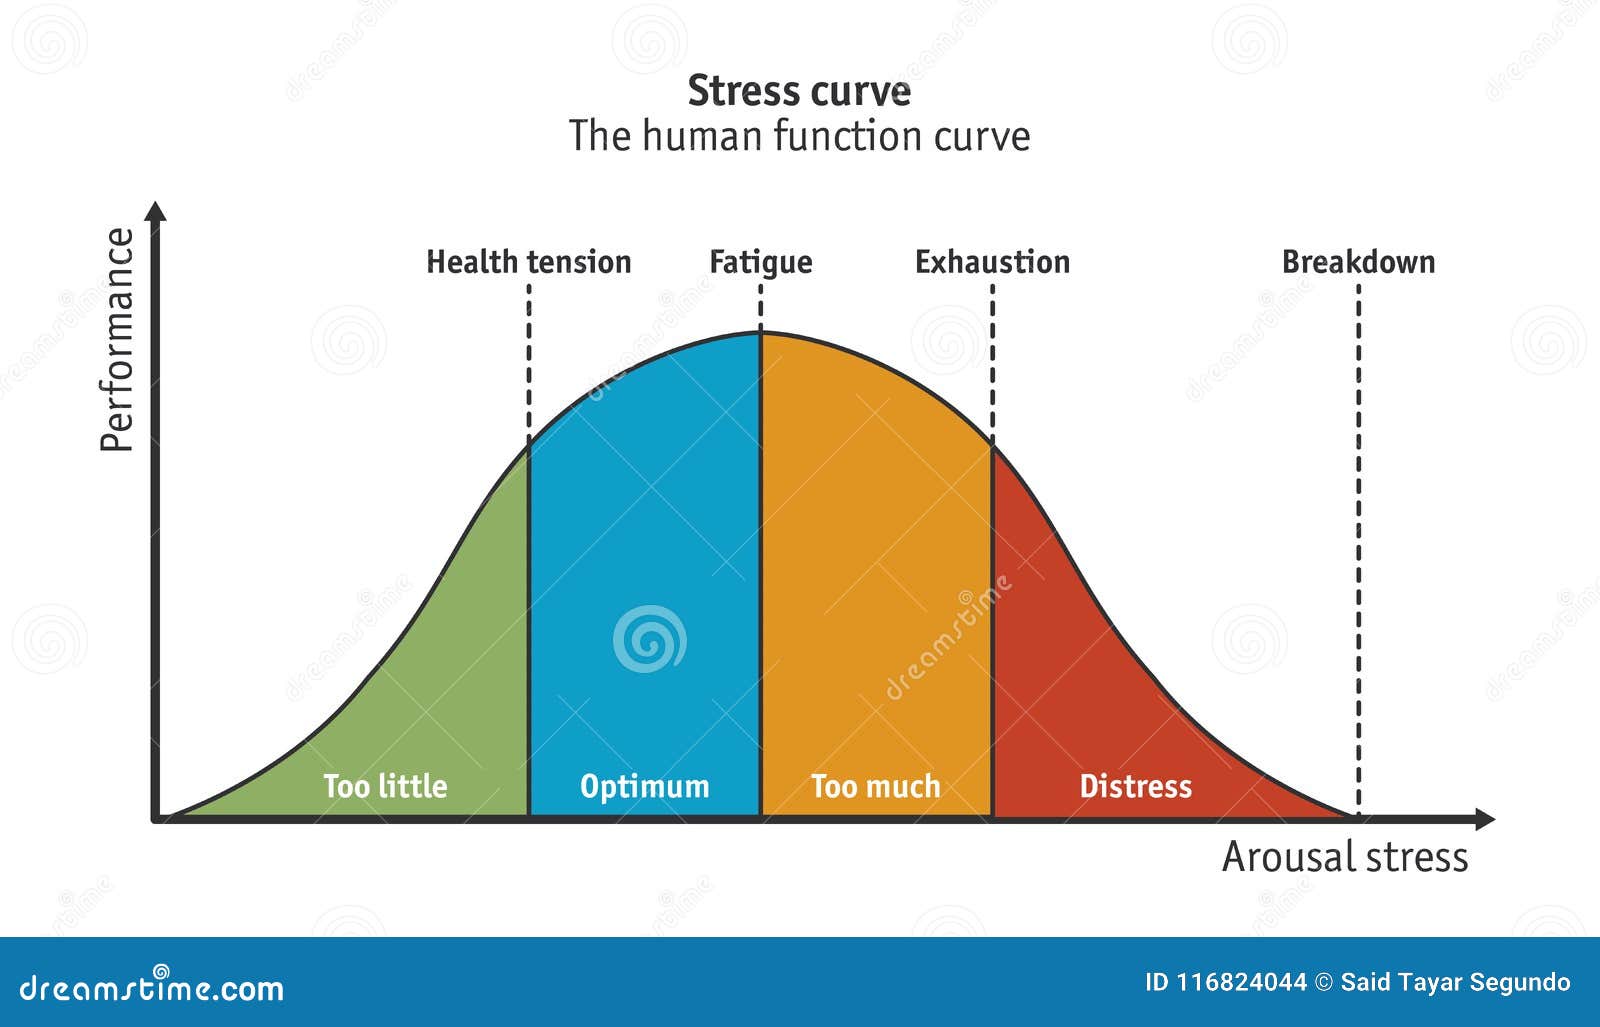 stress curve or human function curve - 